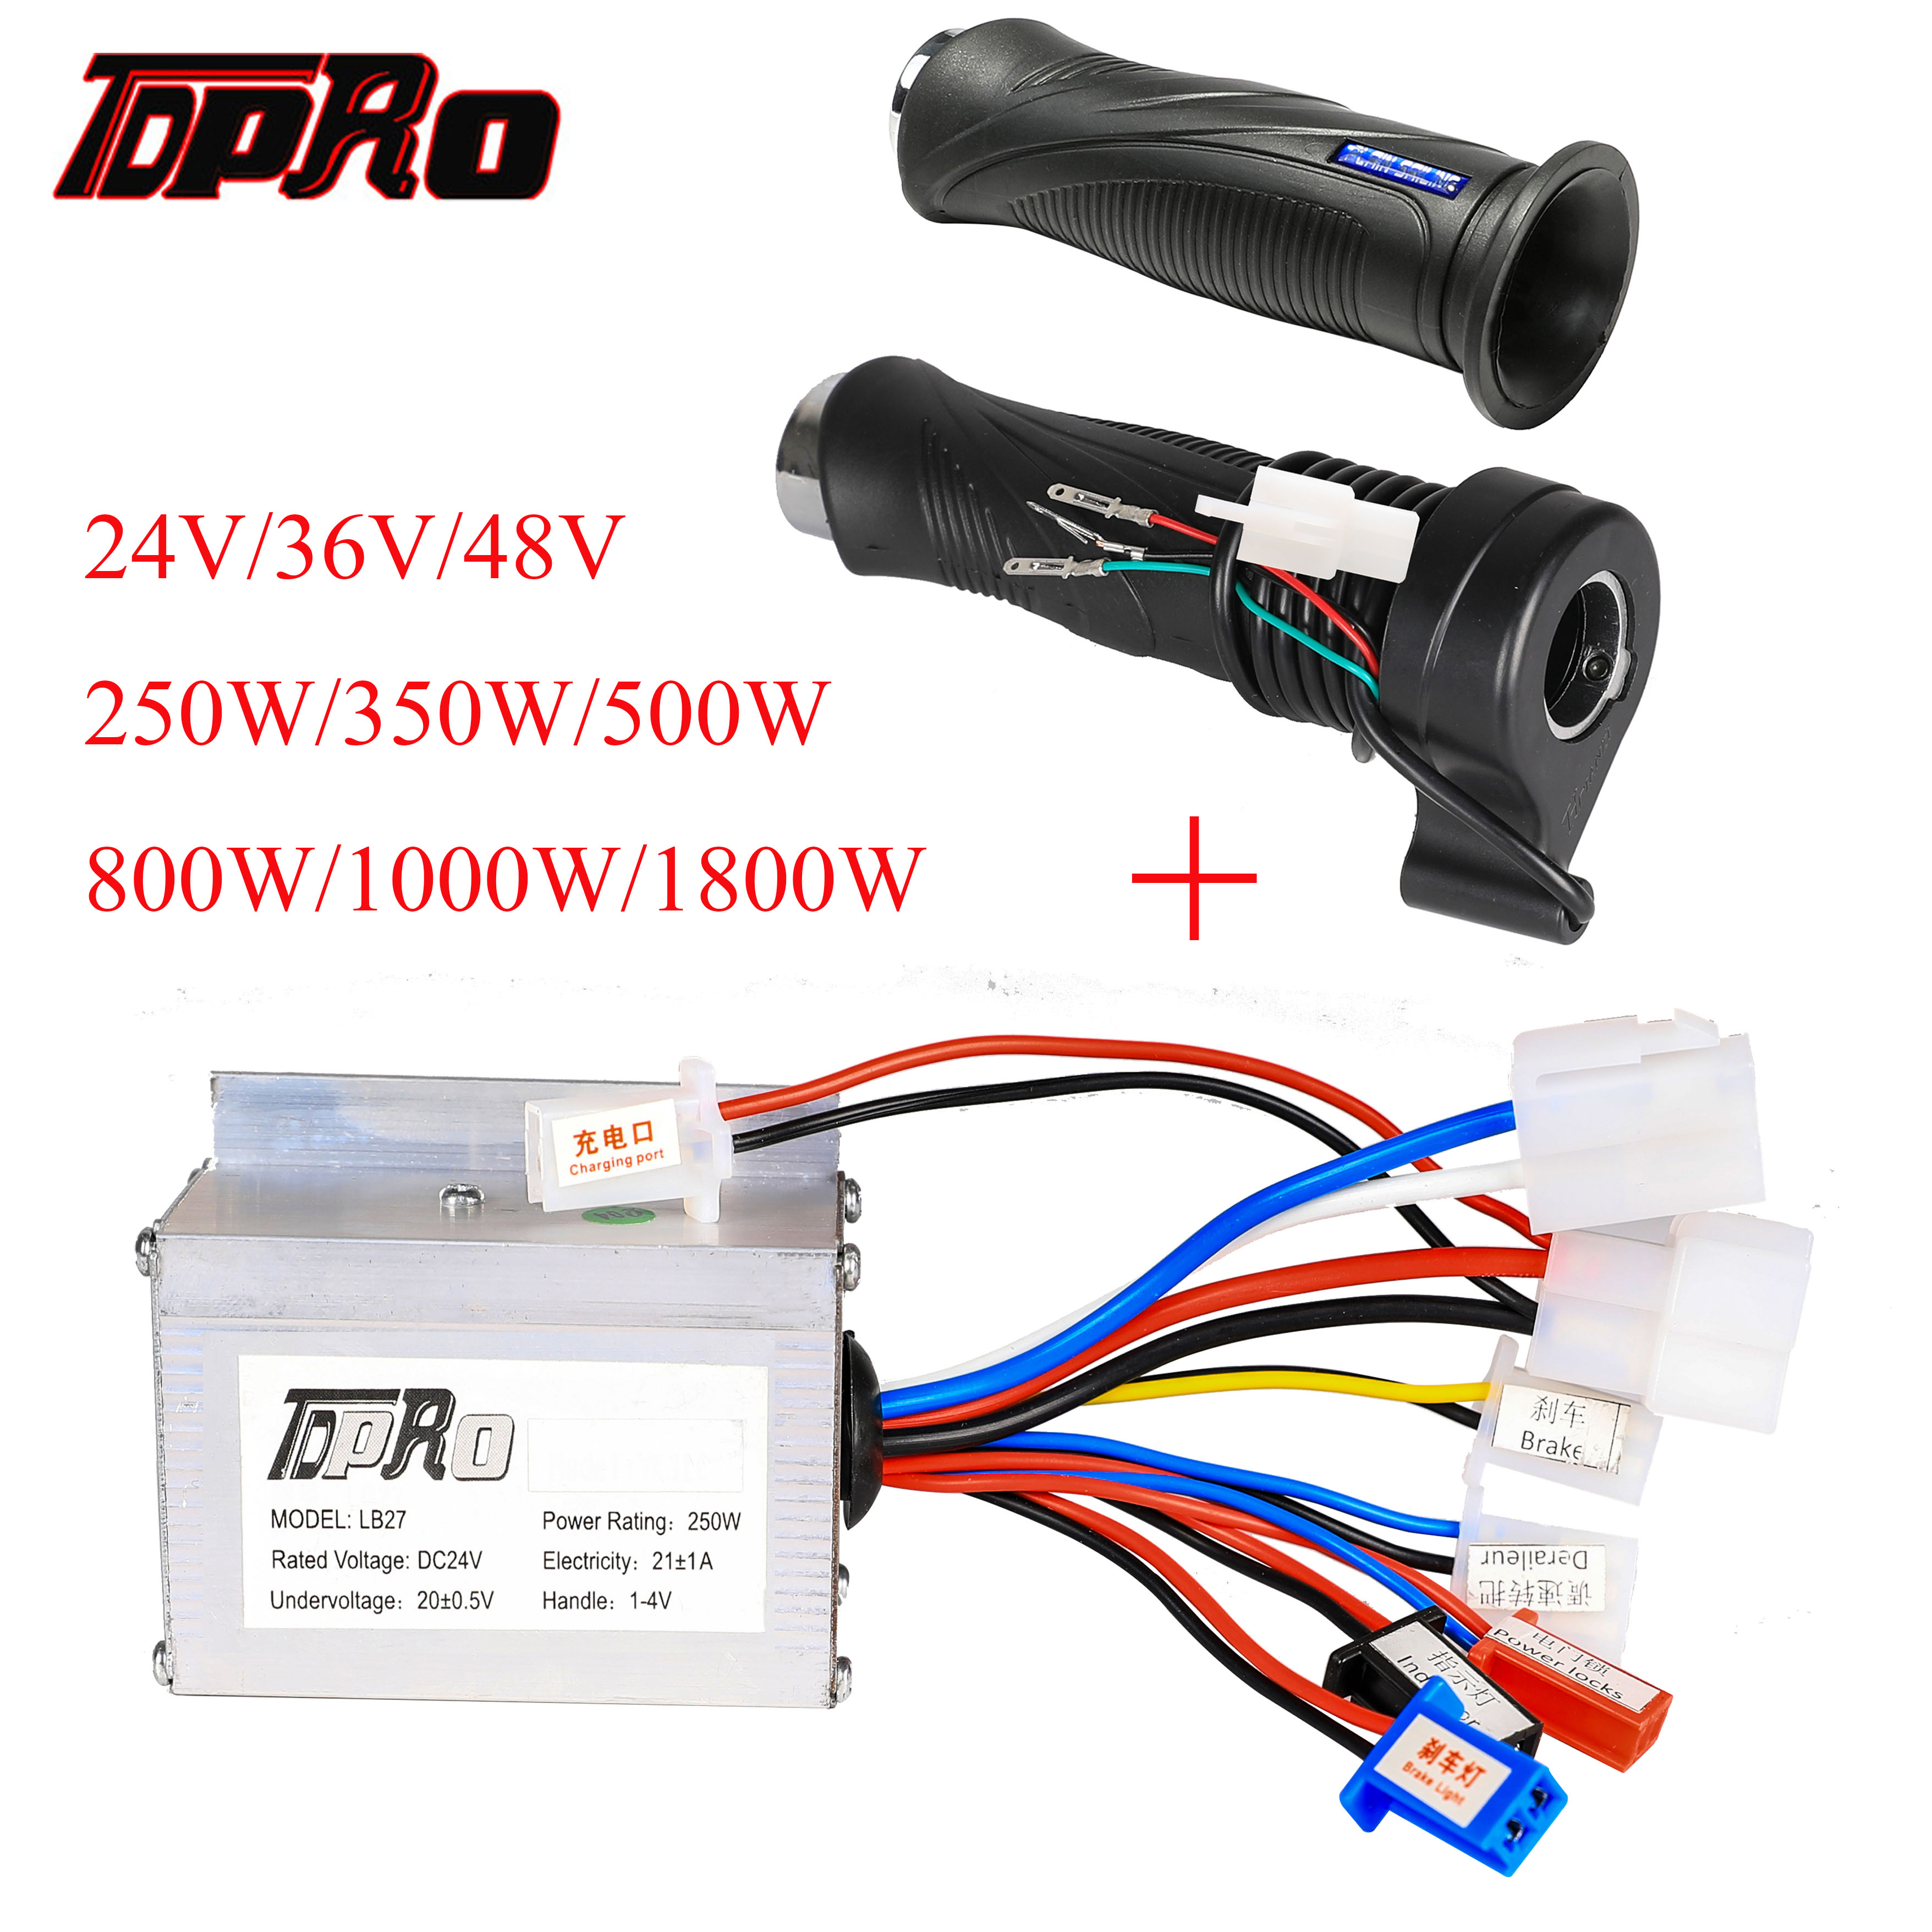 Motor Brushed Speed Controller 36V 800W&Thumb Throttle for Electric bike scooter 